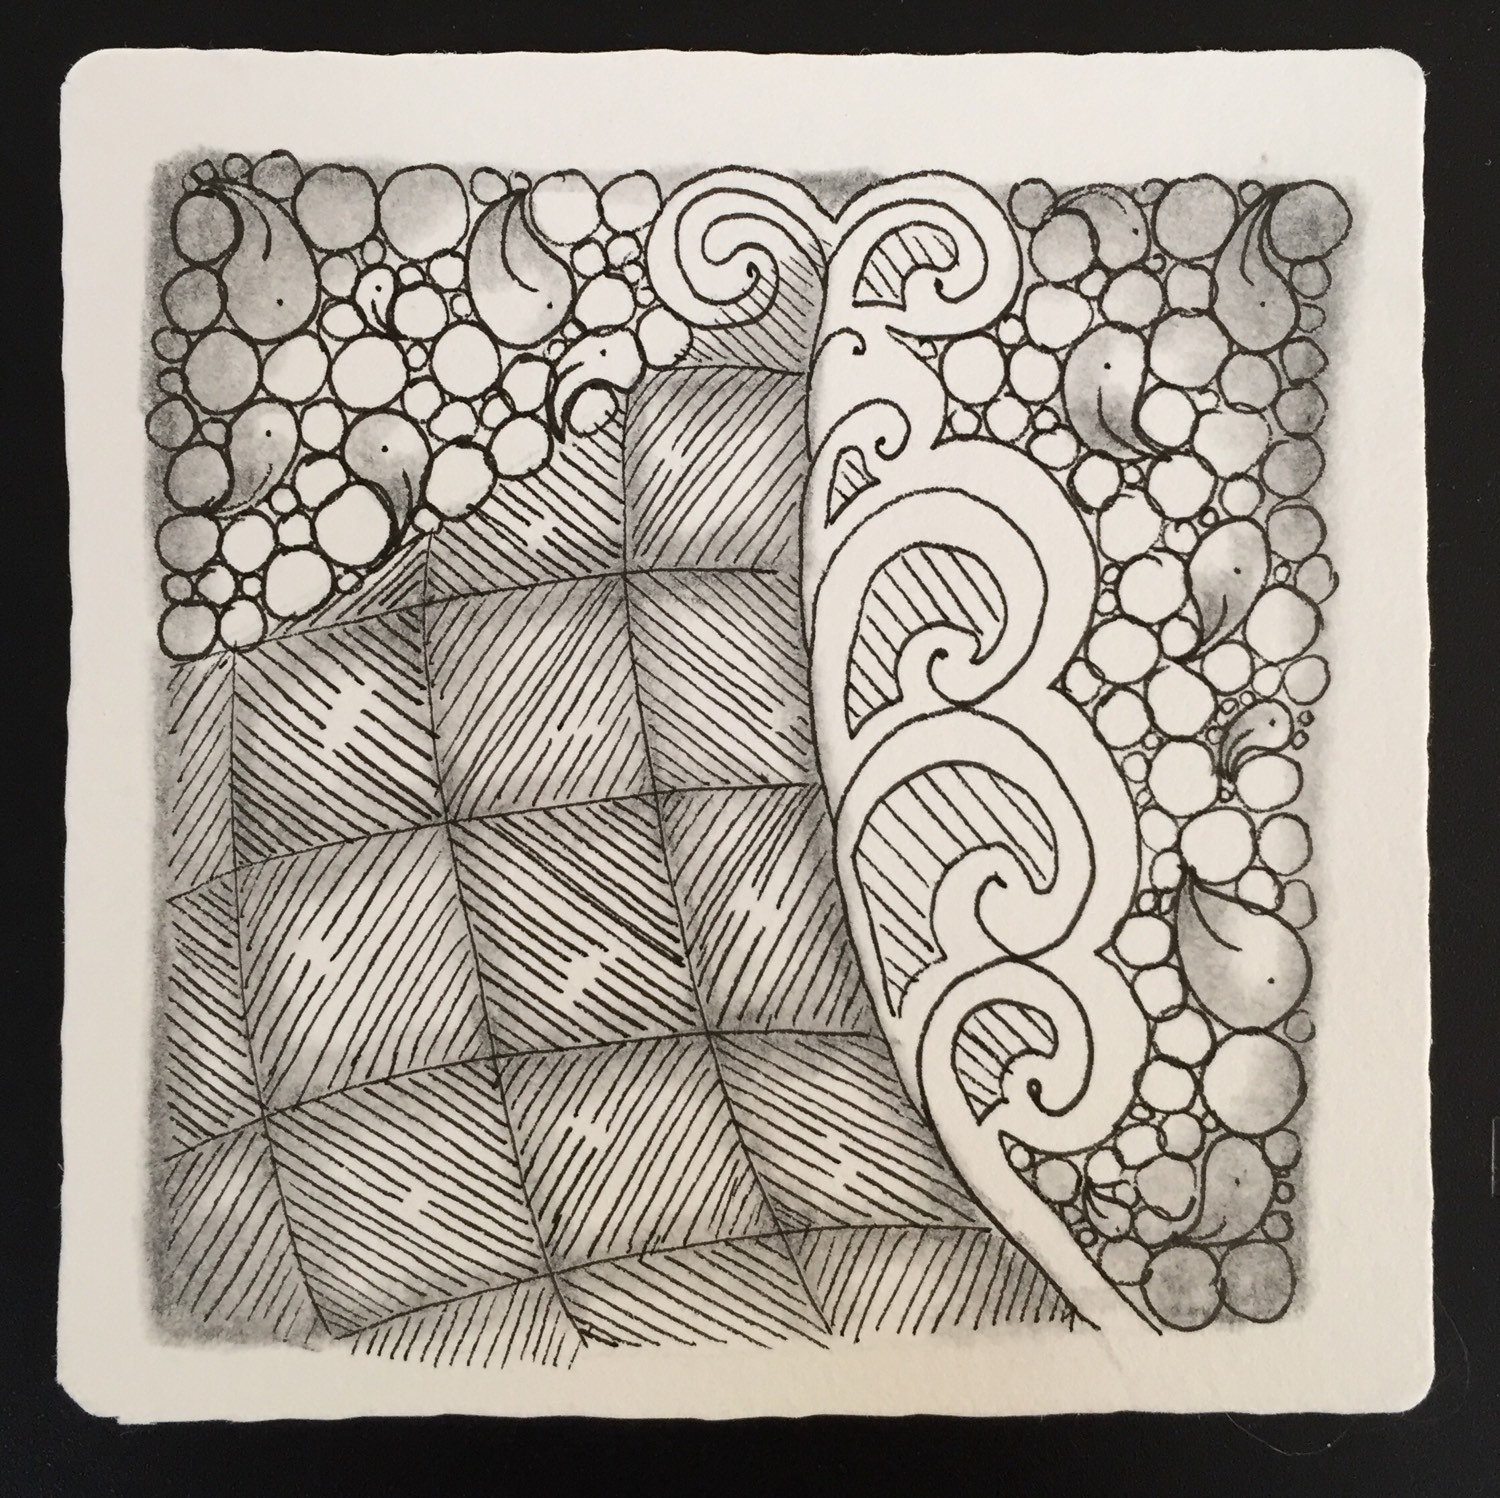 Items similar to Original Zentangle Drawing Waves on Etsy